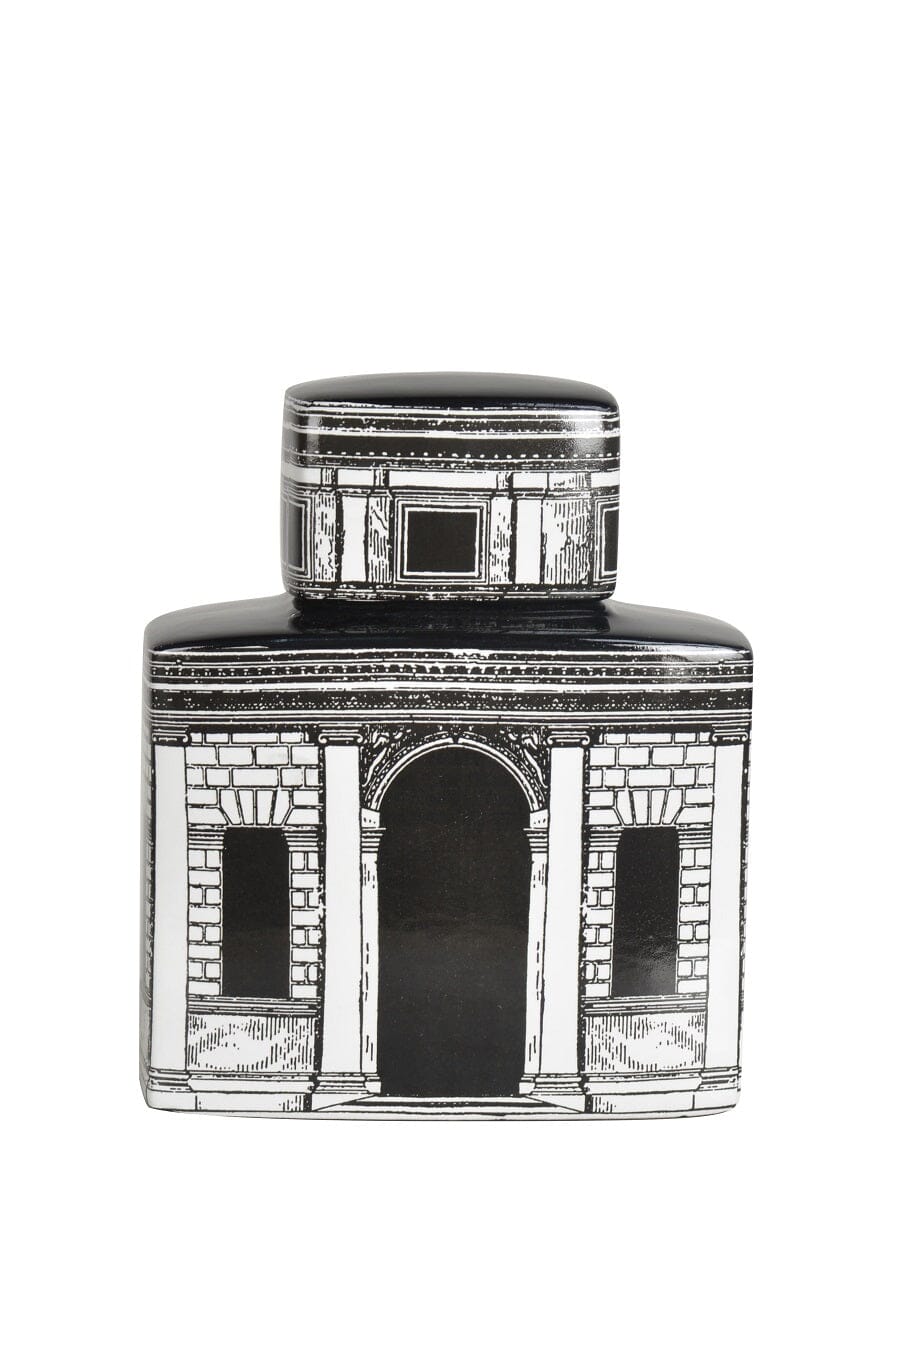 B&W Firenze Bottle Fancy Home Collection Small 